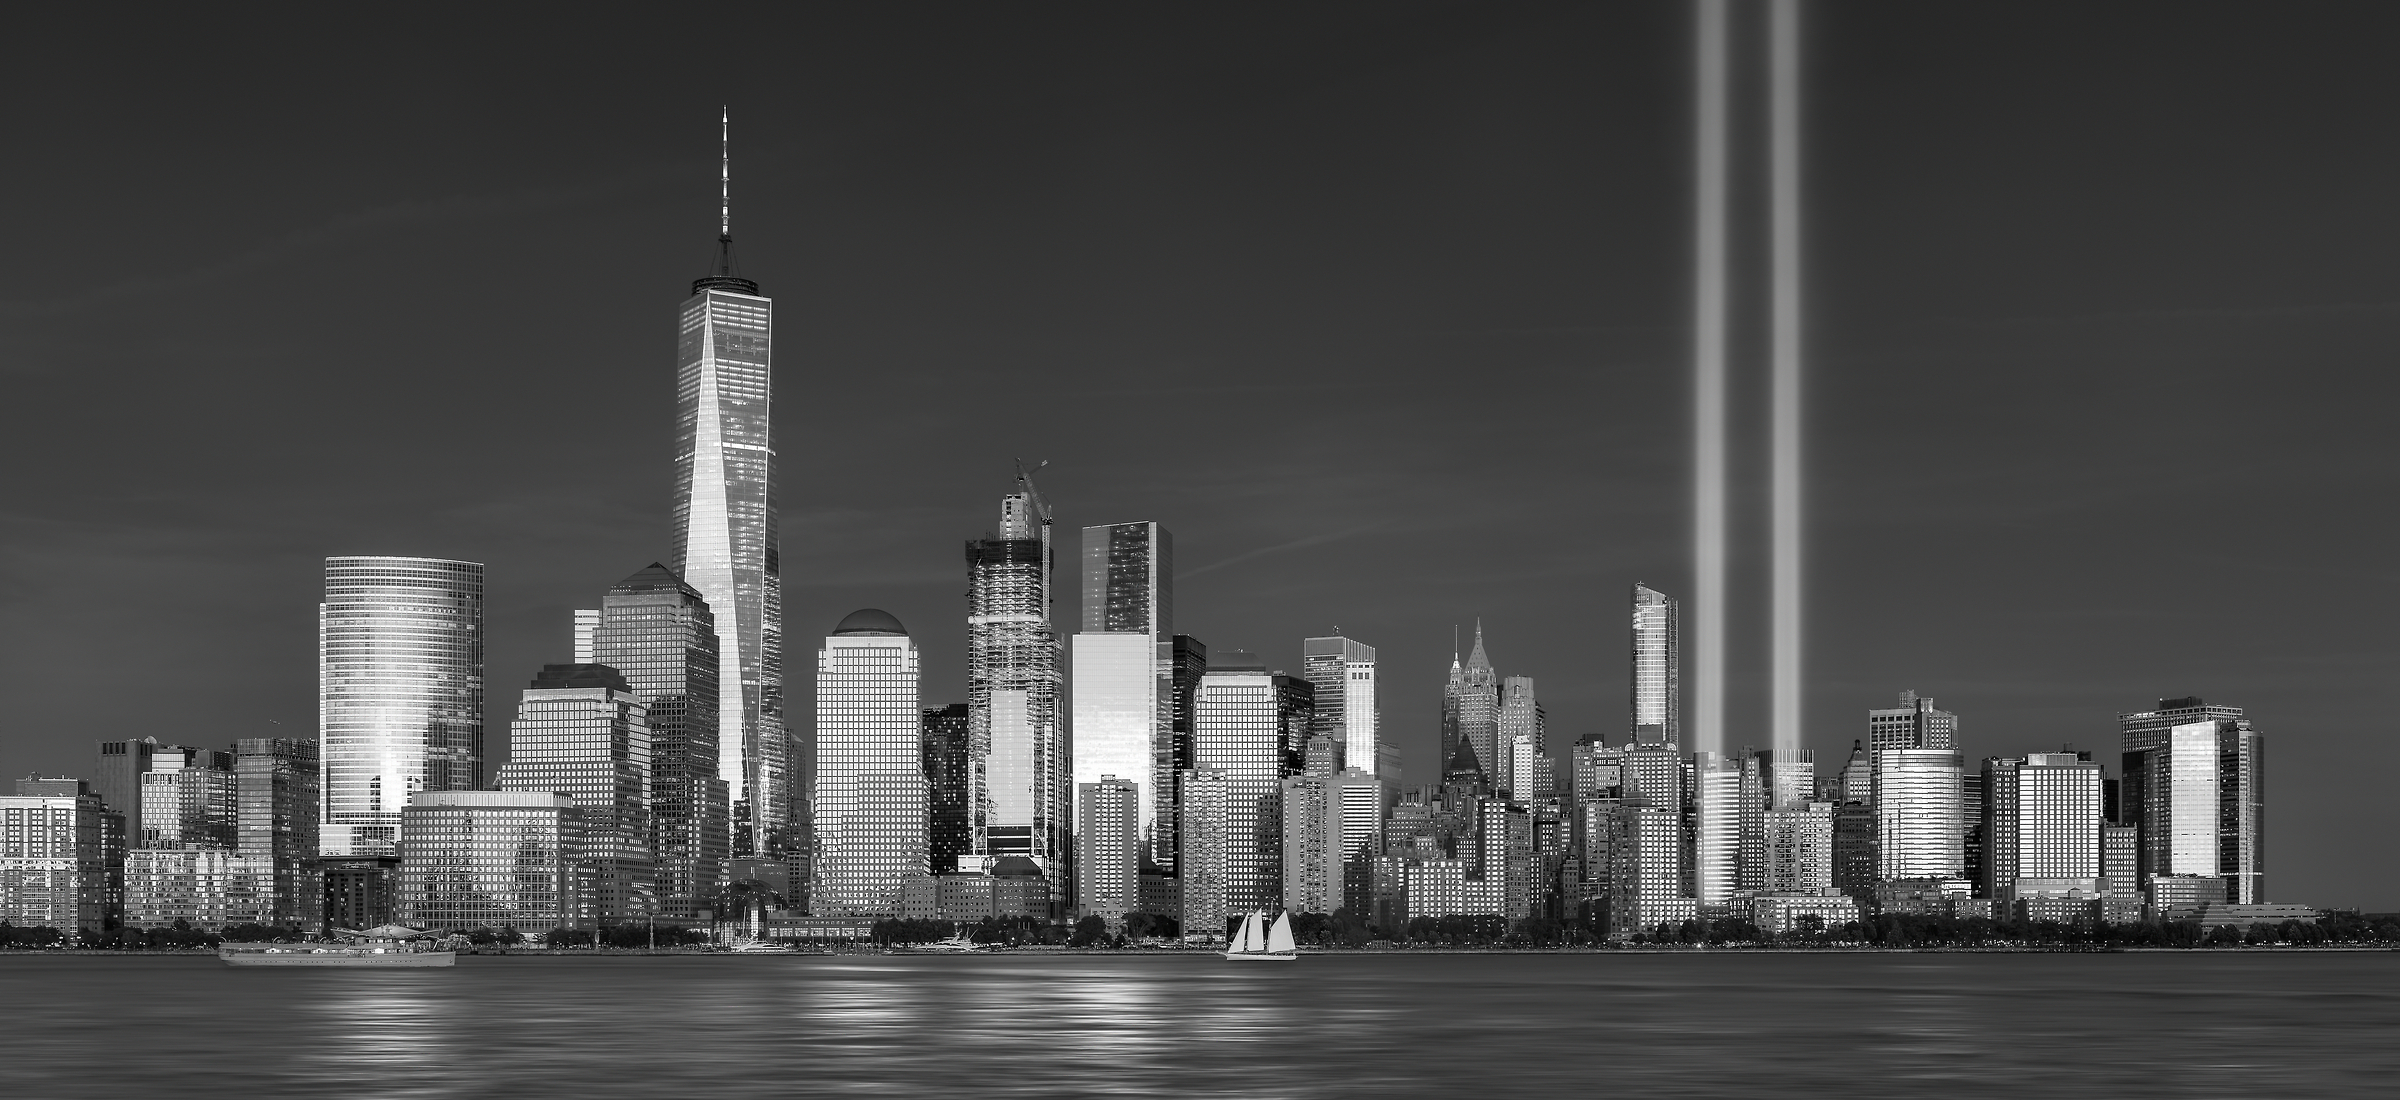 407 megapixels! The highest resolution VAST photo of the September 11th 9/11 Tribute in Light memorial, the World Trade Center, and the Manhattan city skyline at sunset in New York City; created by Dan Piech.